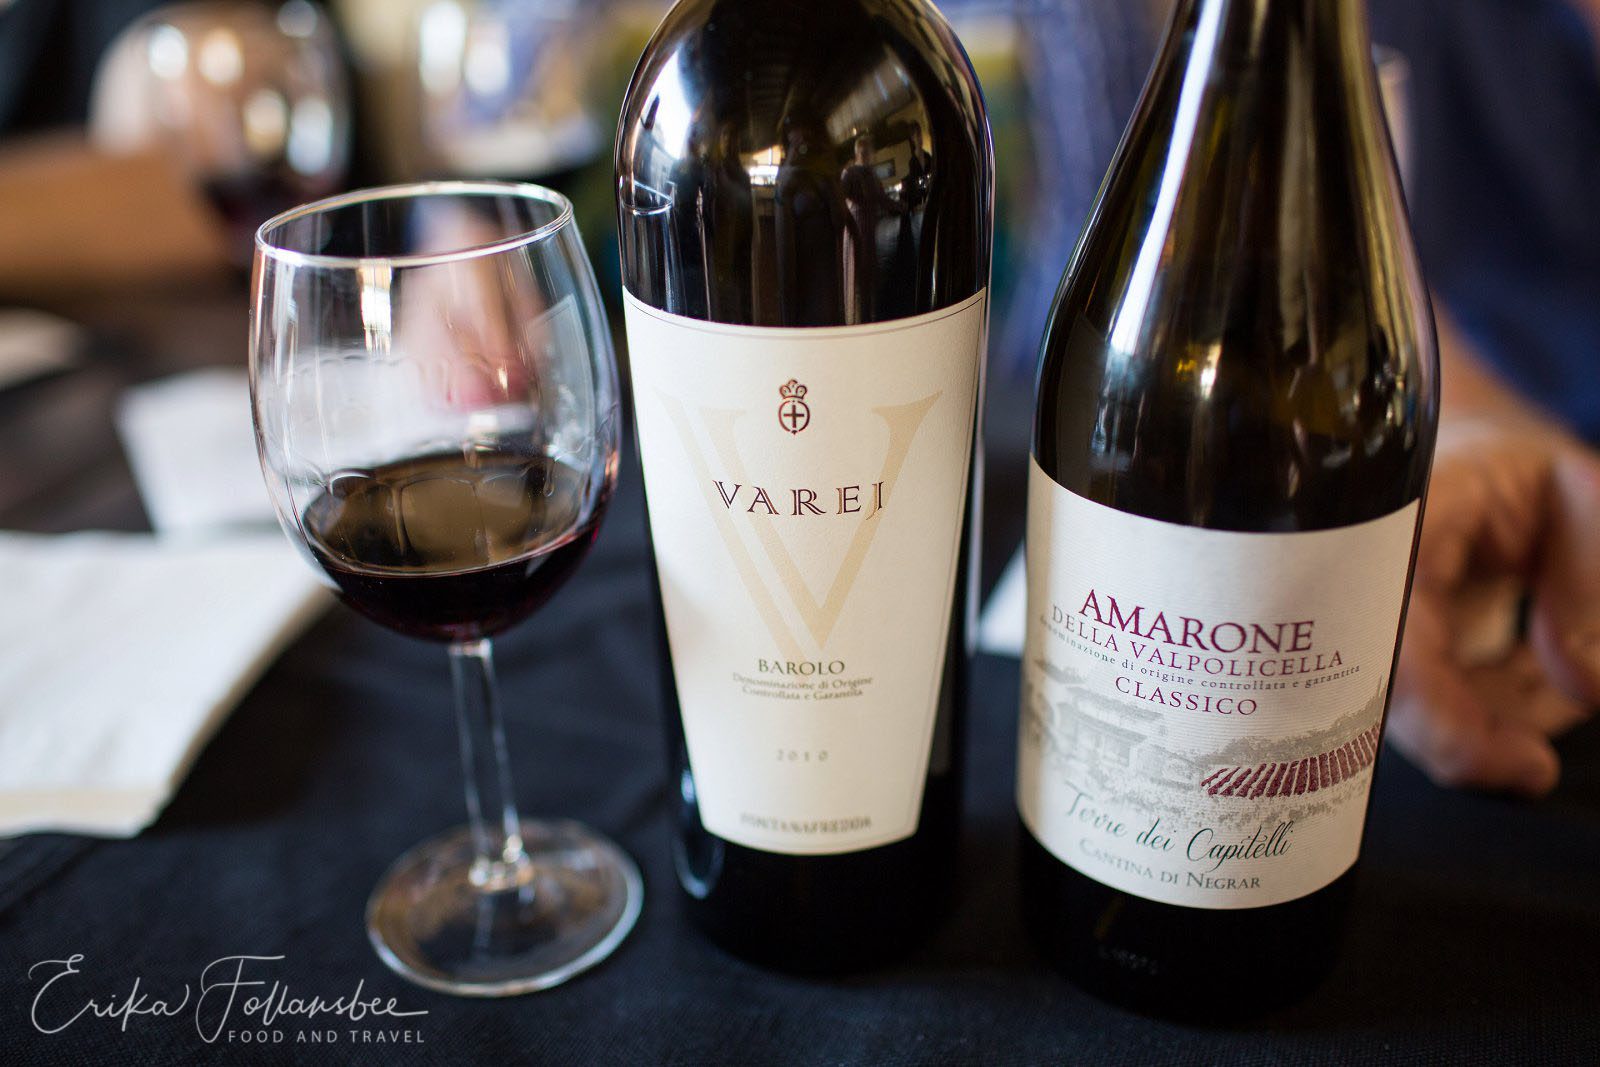 Barone and Amarone red wine in Rome